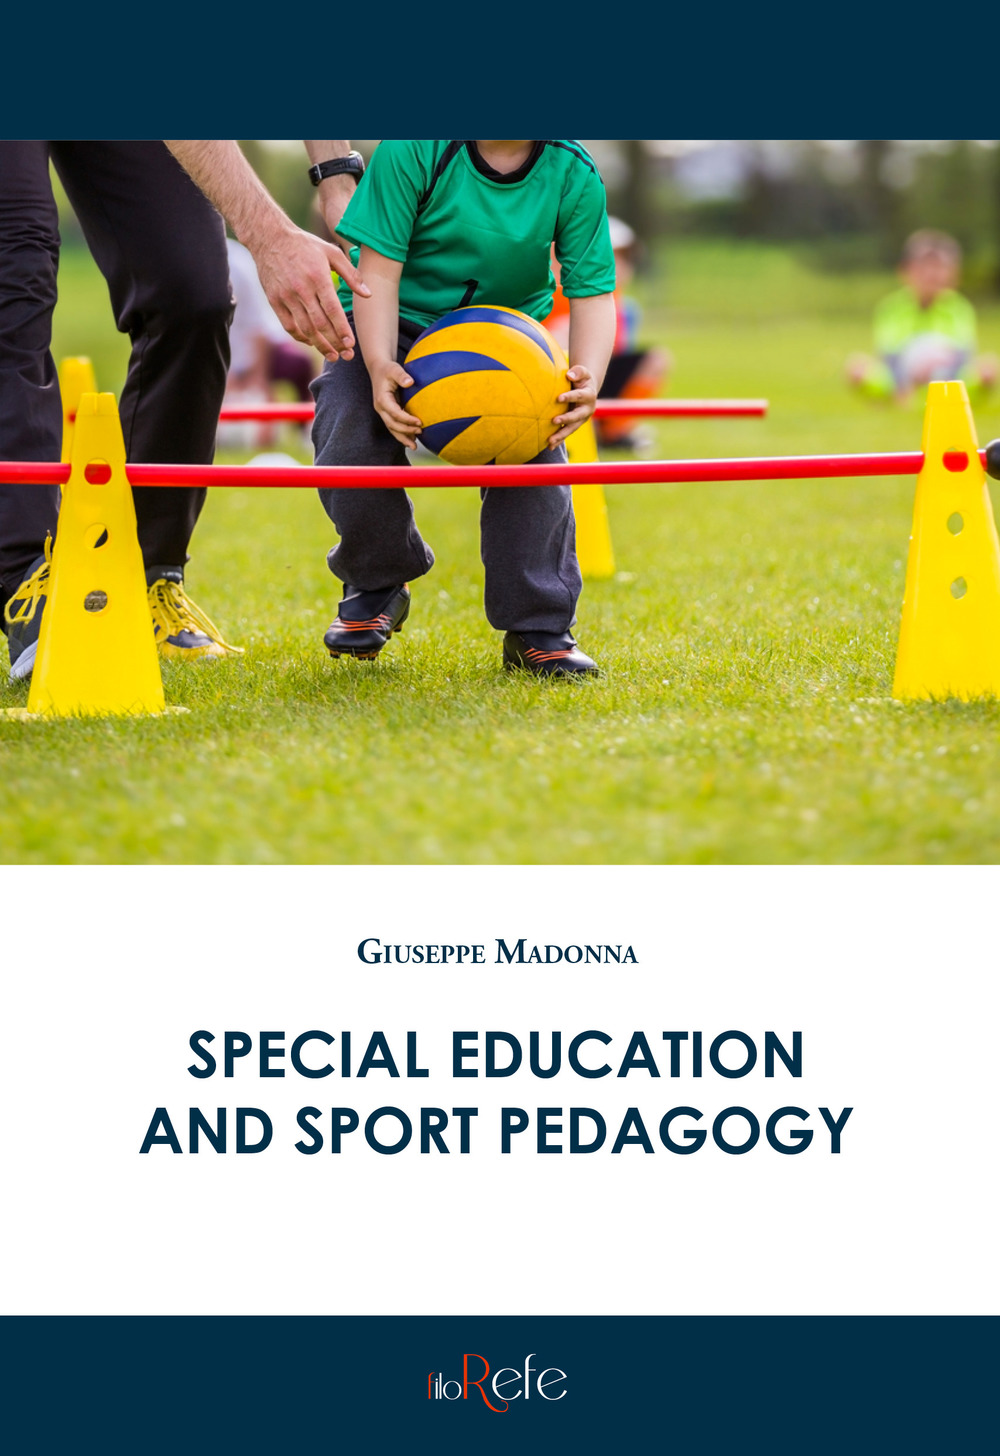 Special education and sport pedagogy